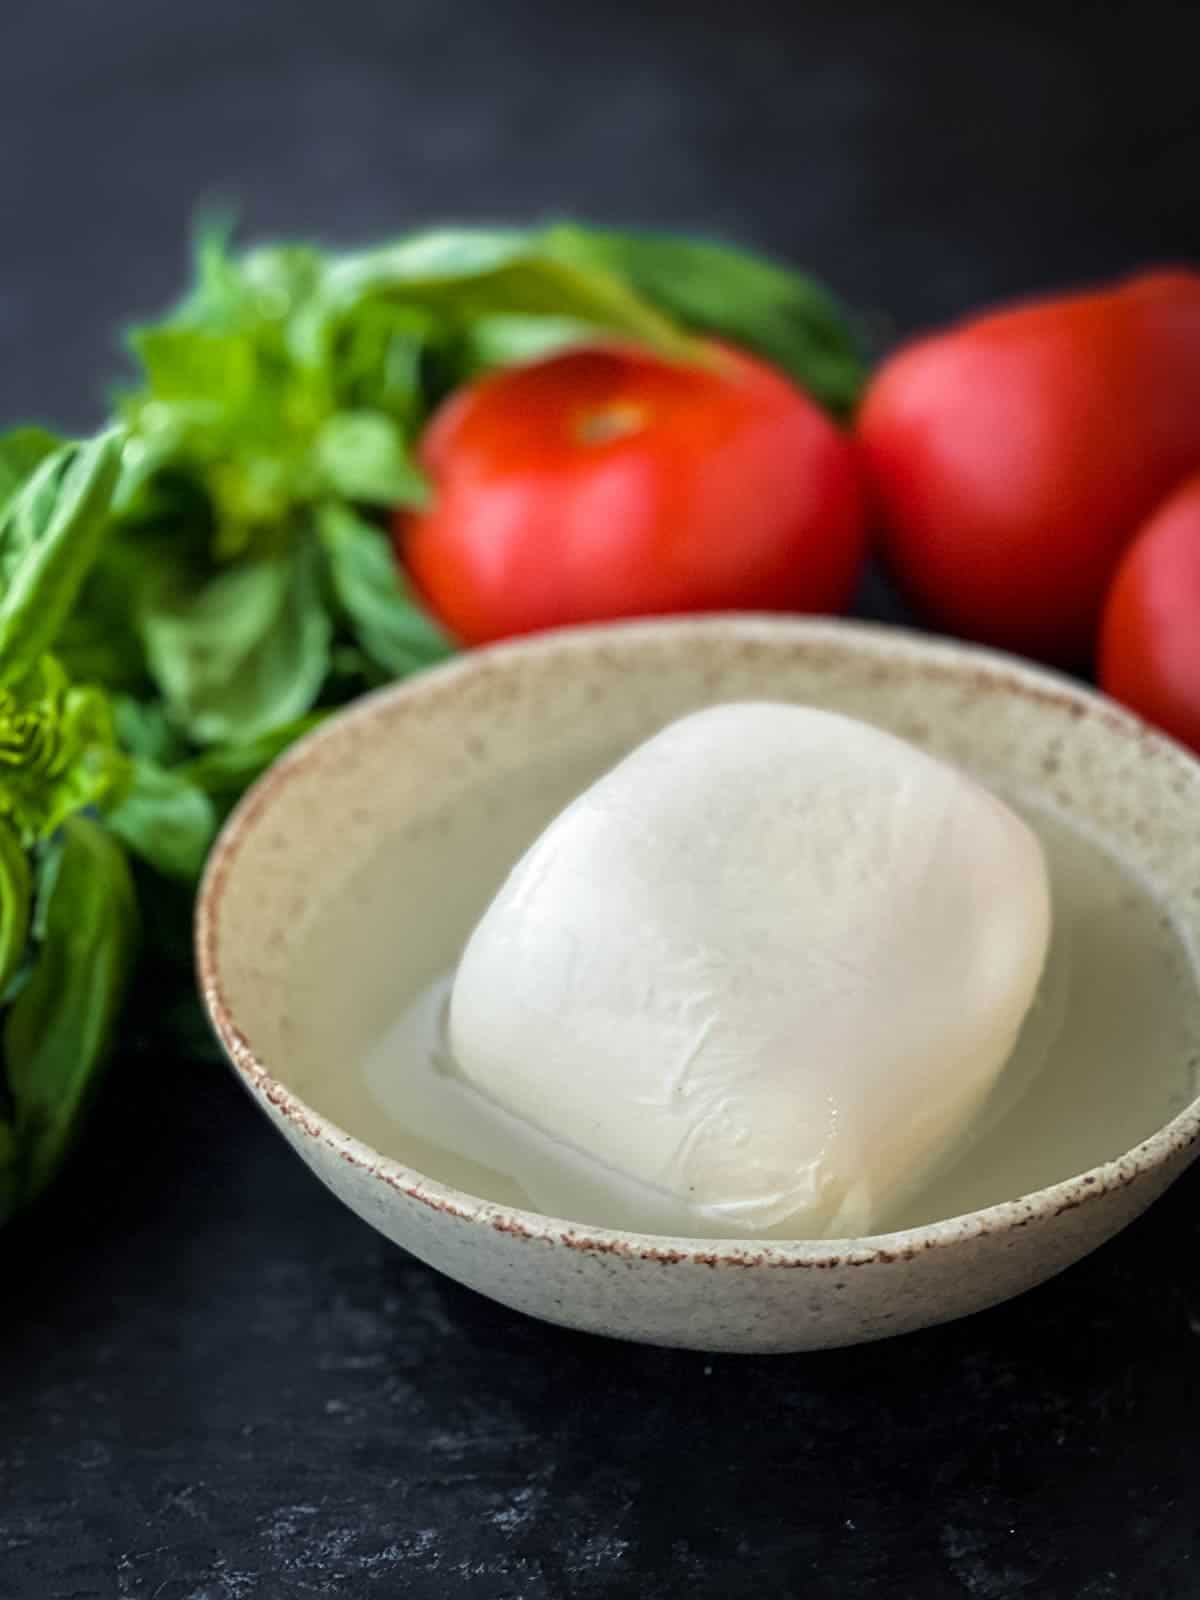 Buffalo mozzarella in brine in a bowl with basil and tomato in the background